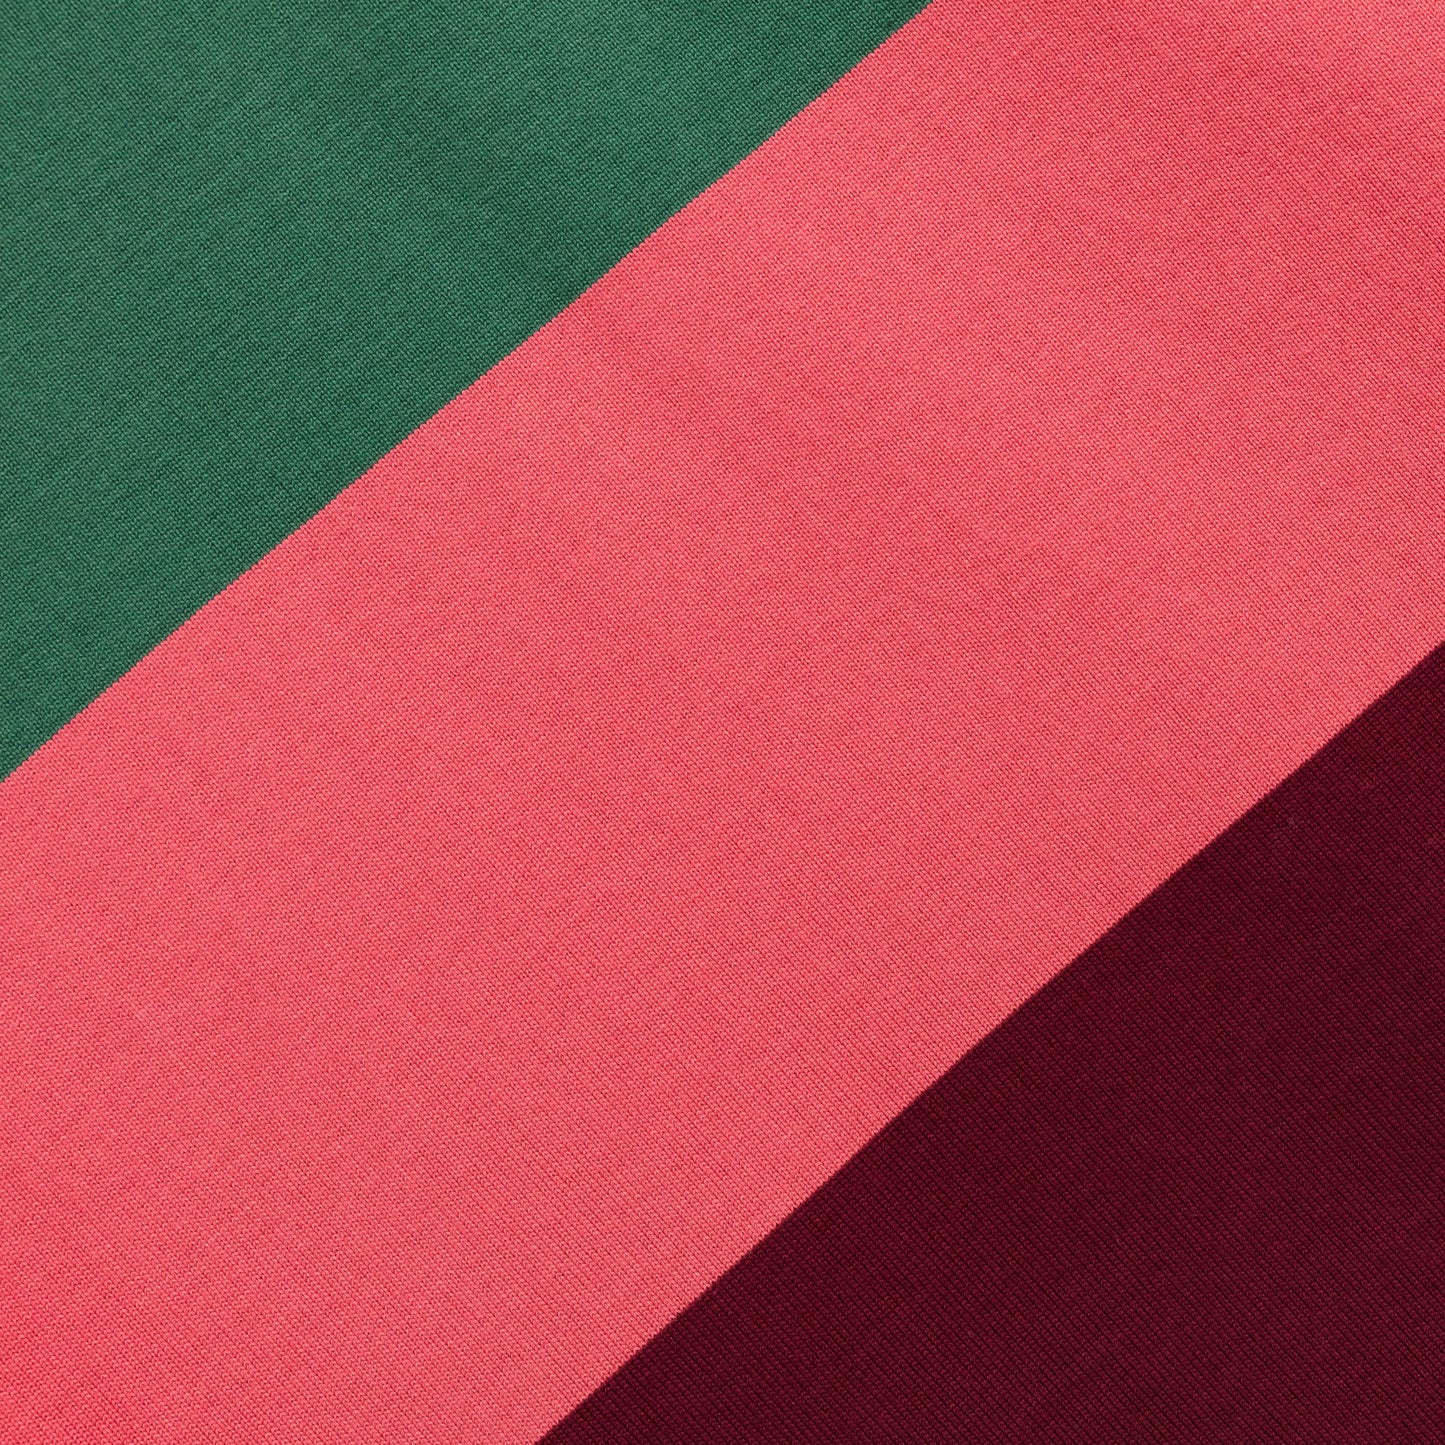 Detail of burgundy, pink and green stripes.